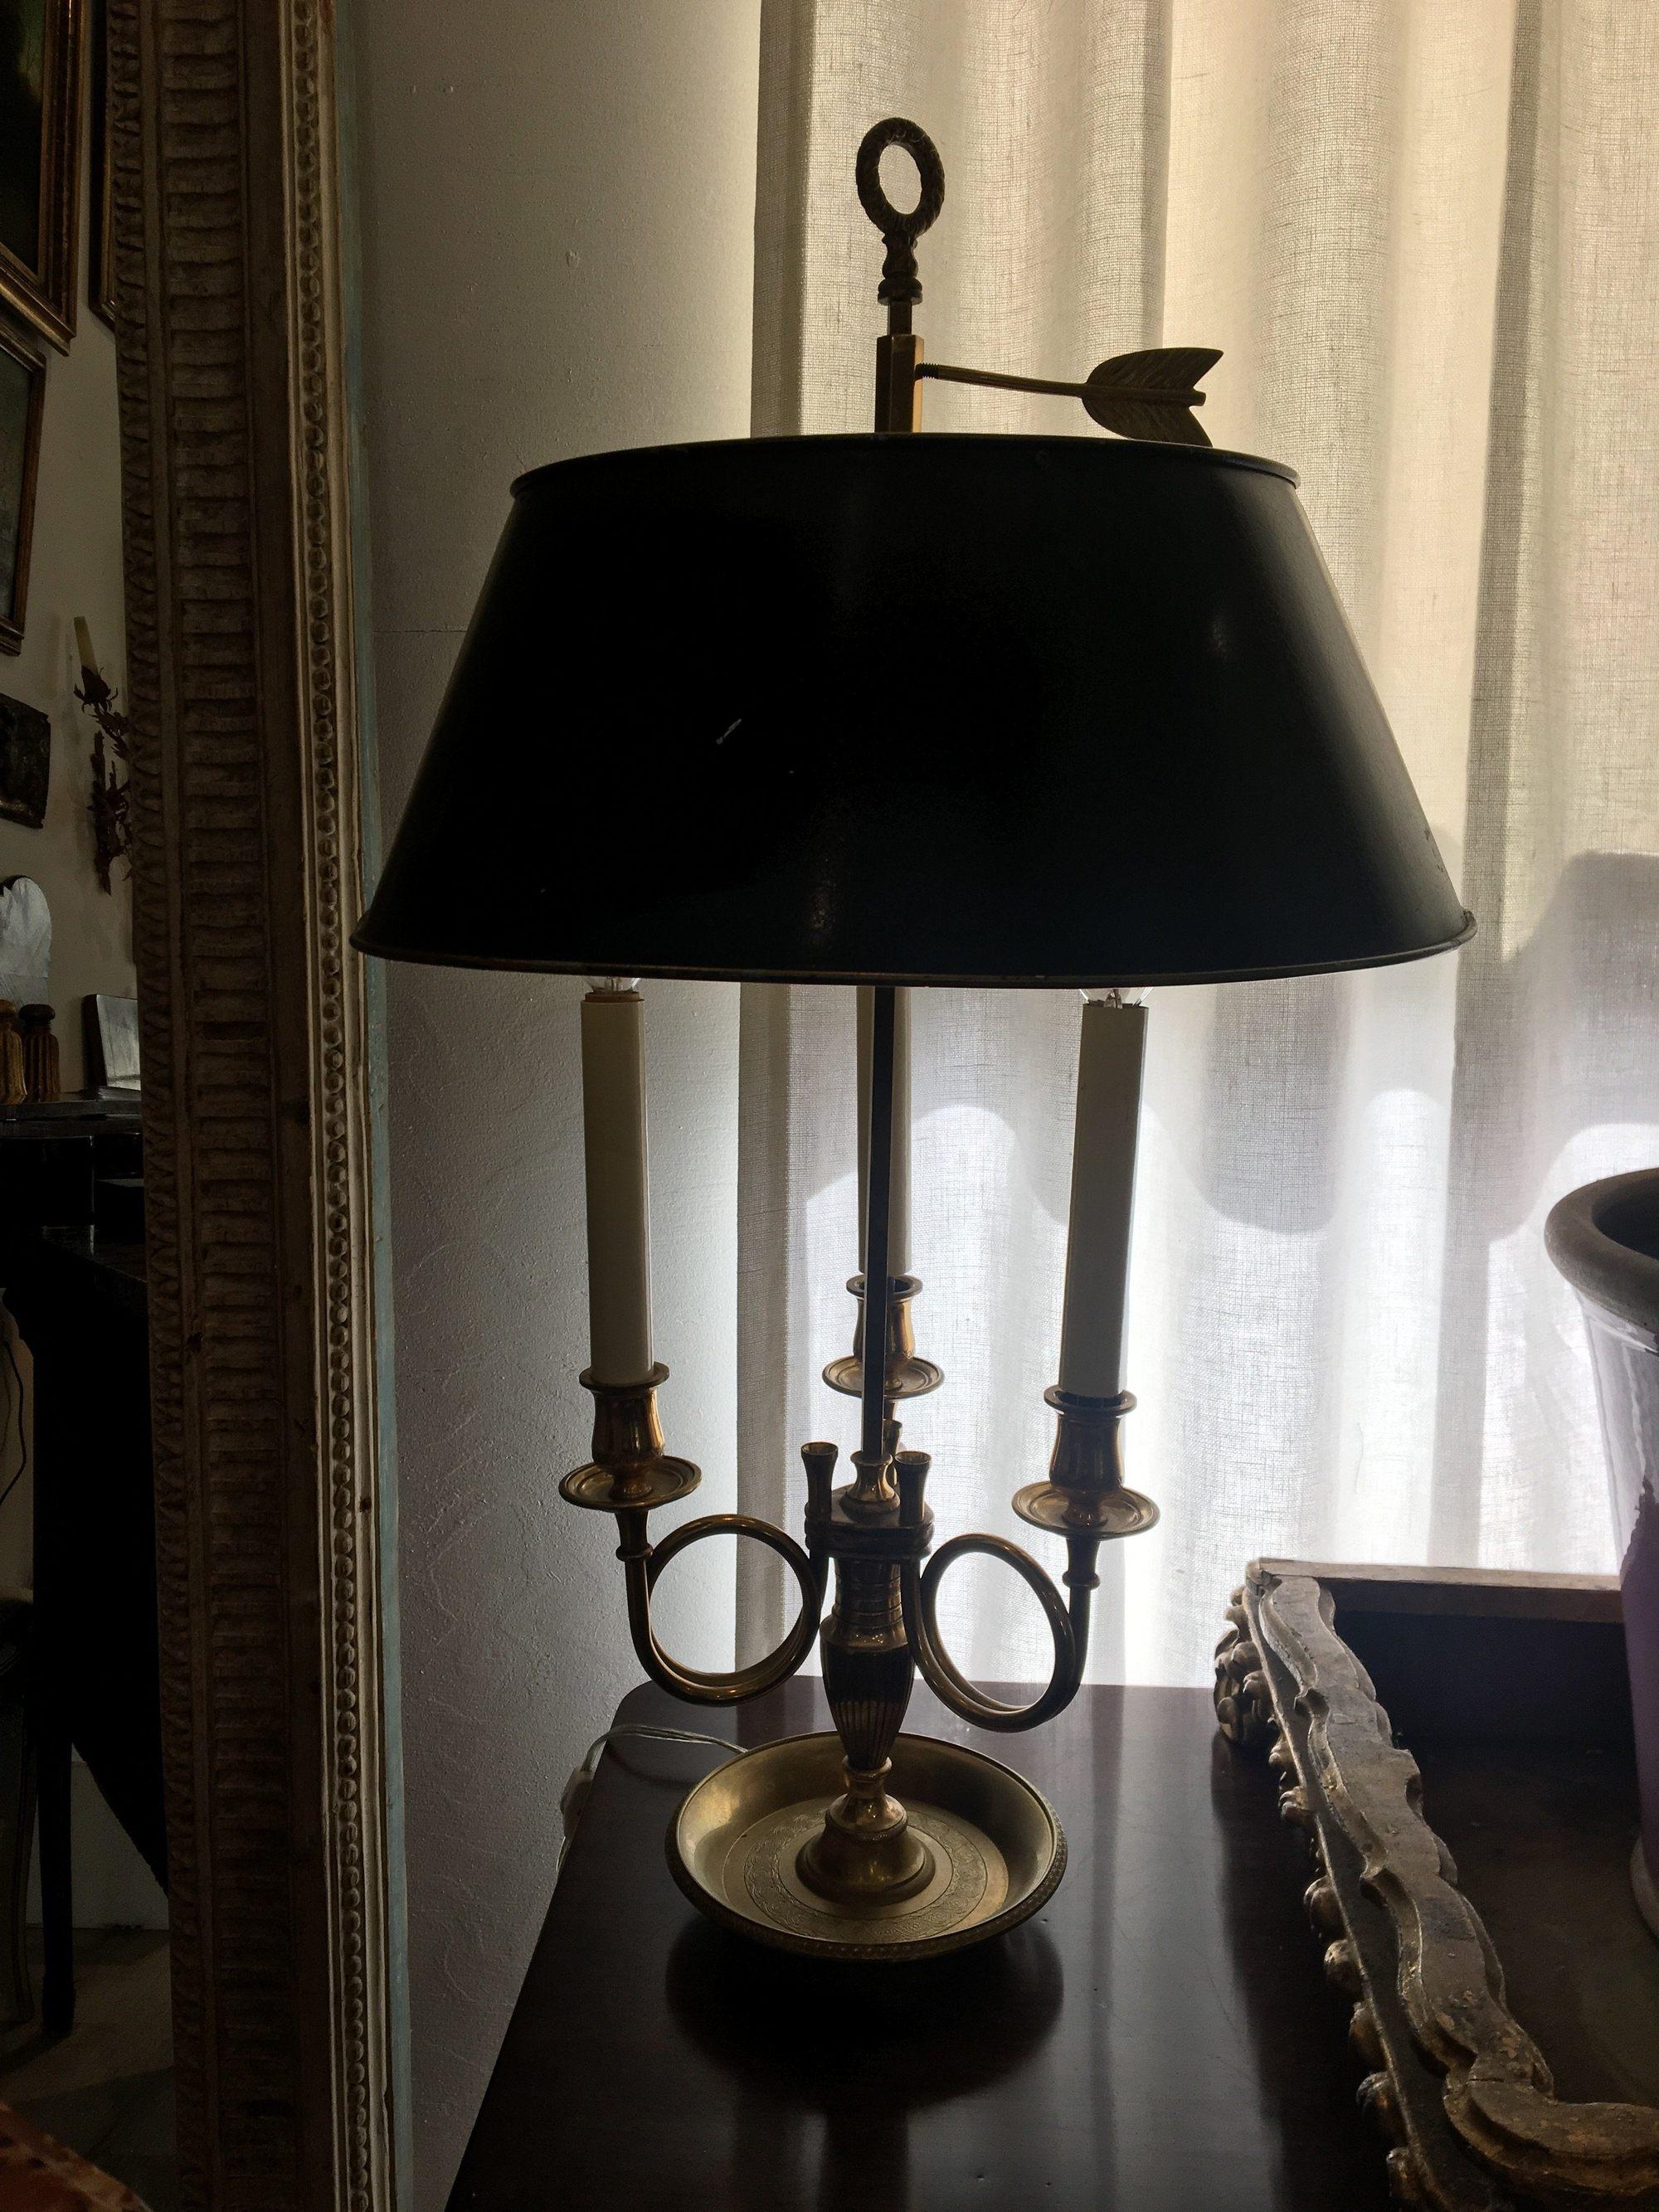 French Directoire Bouillot table lamp with a tole shade, electrified, French horn motif, finely made brass, having three-light. 27 ¼ to top of finial, 16” wide at shade, 6 ½” diameter at base.